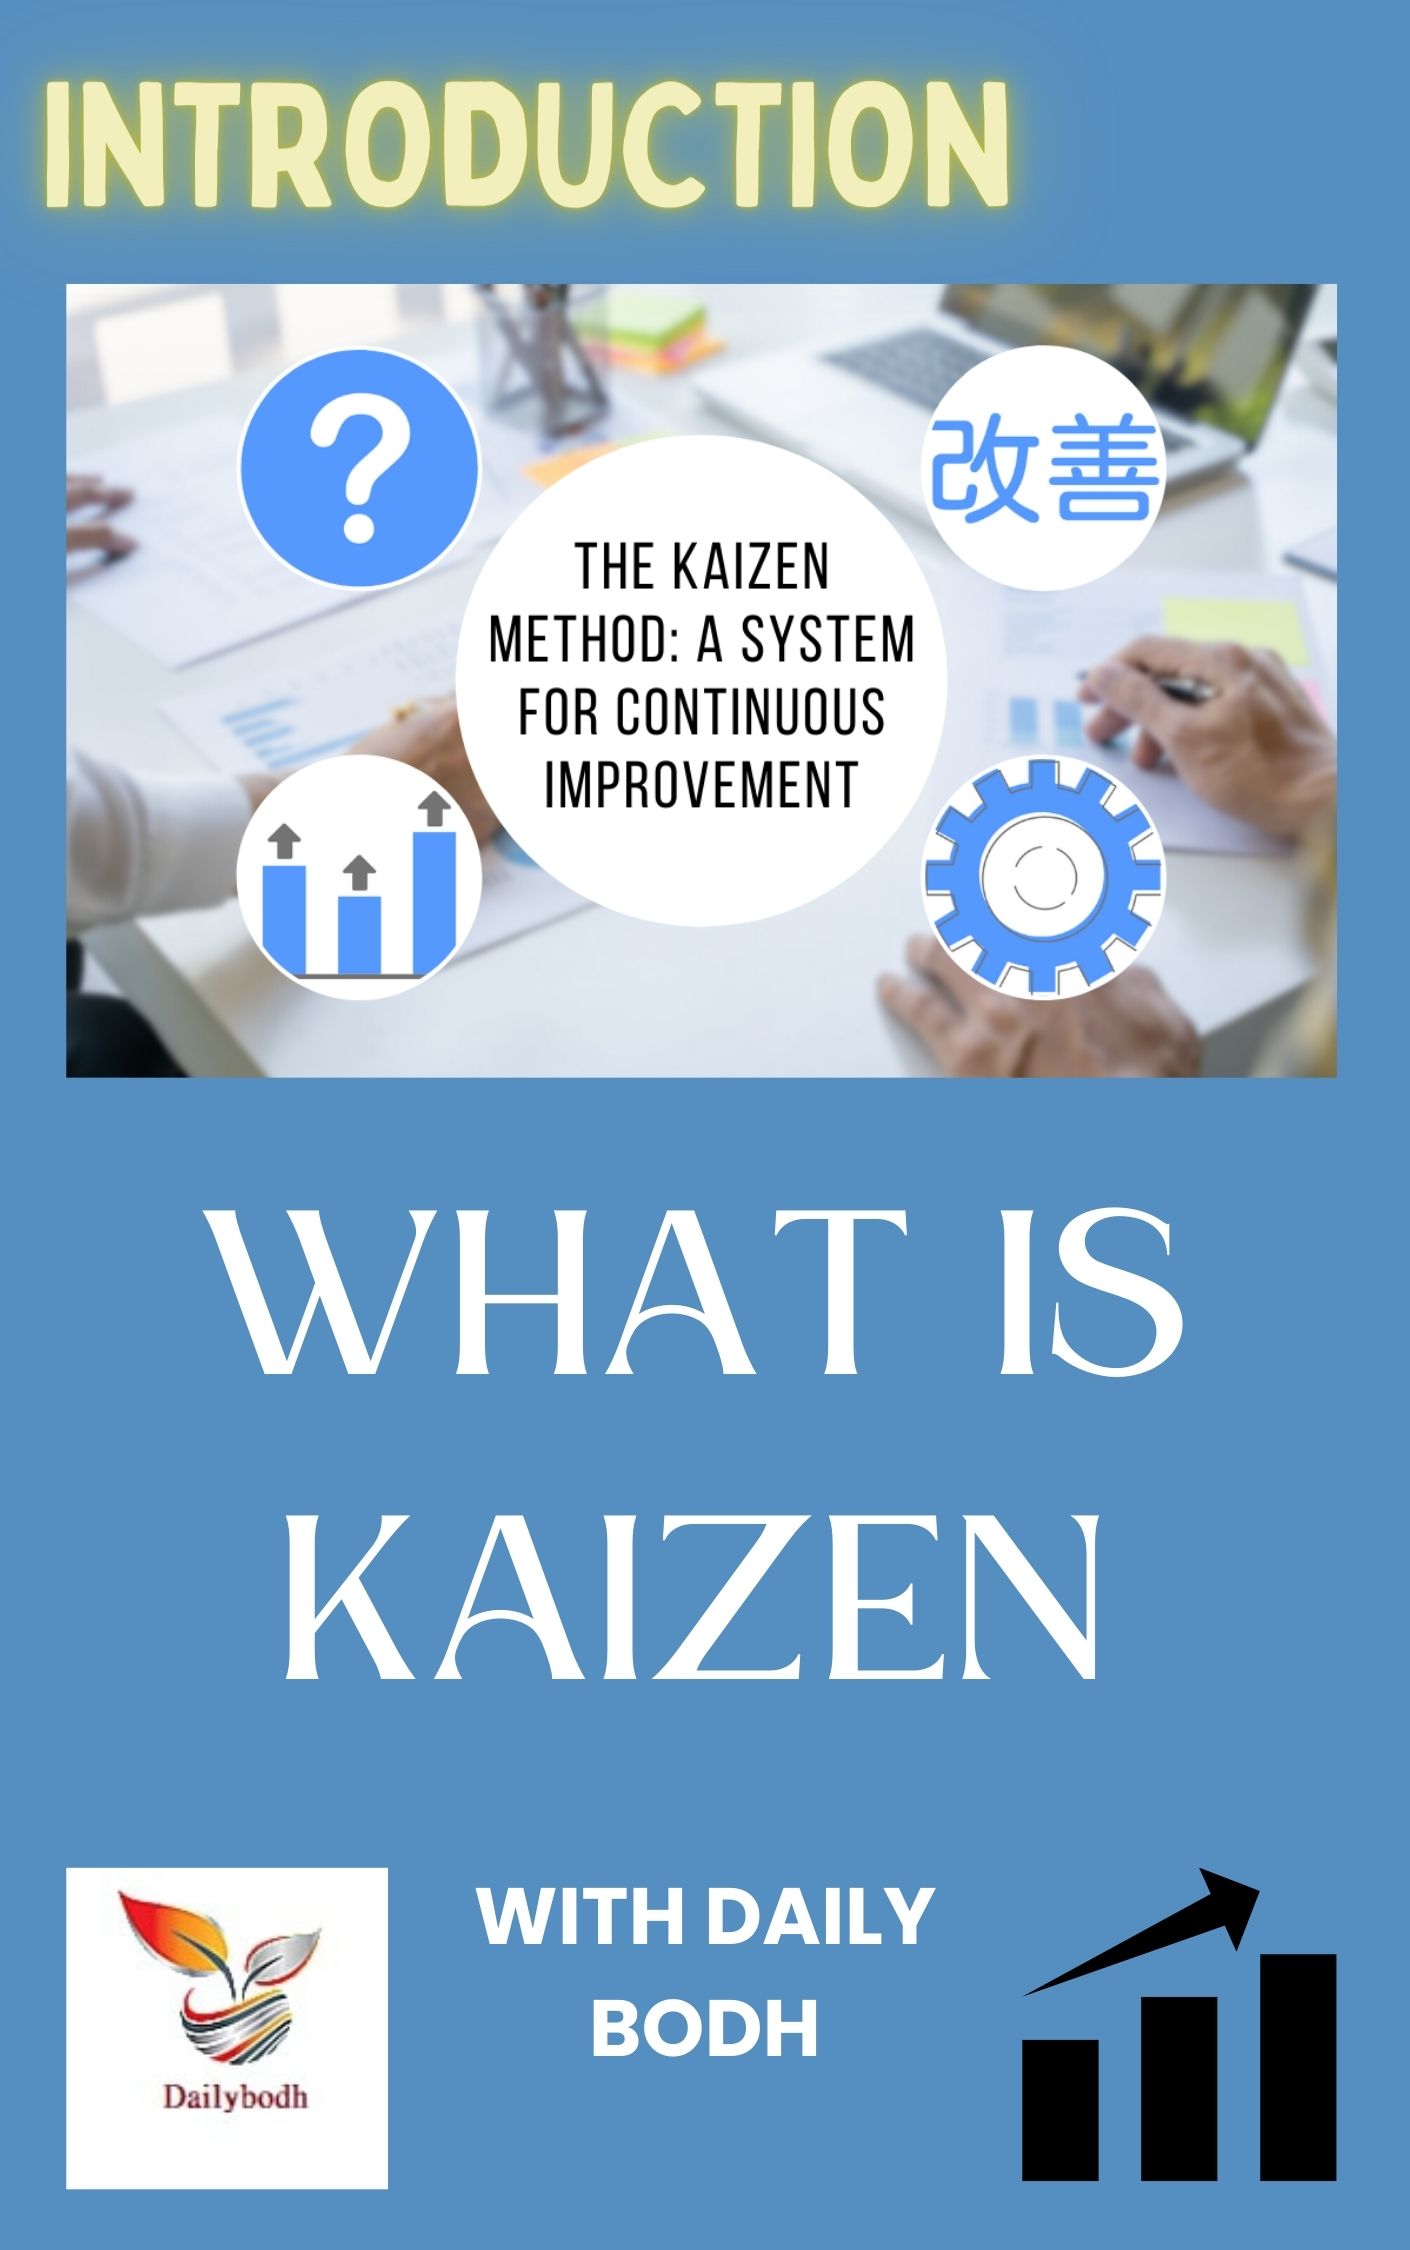 What is kaizen